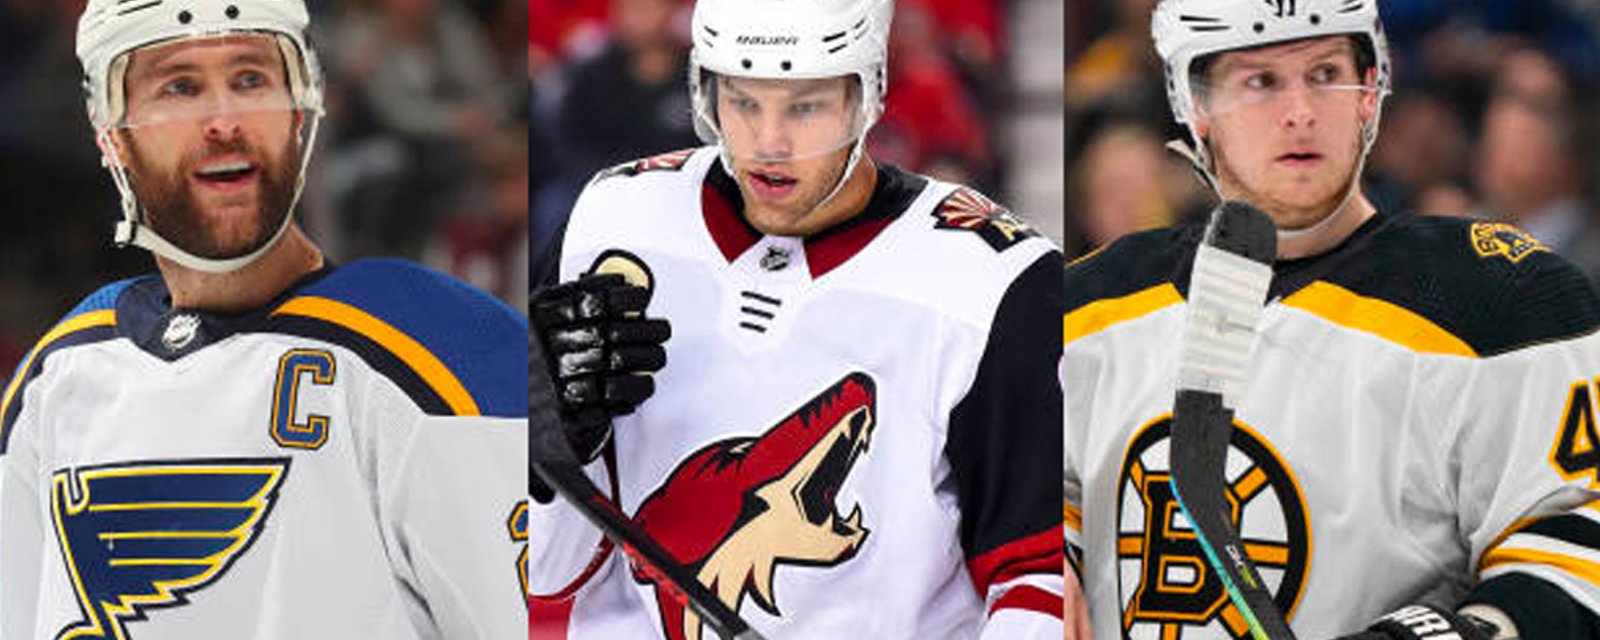 Report: NHL to push free agent contracts back, potentially into next season 